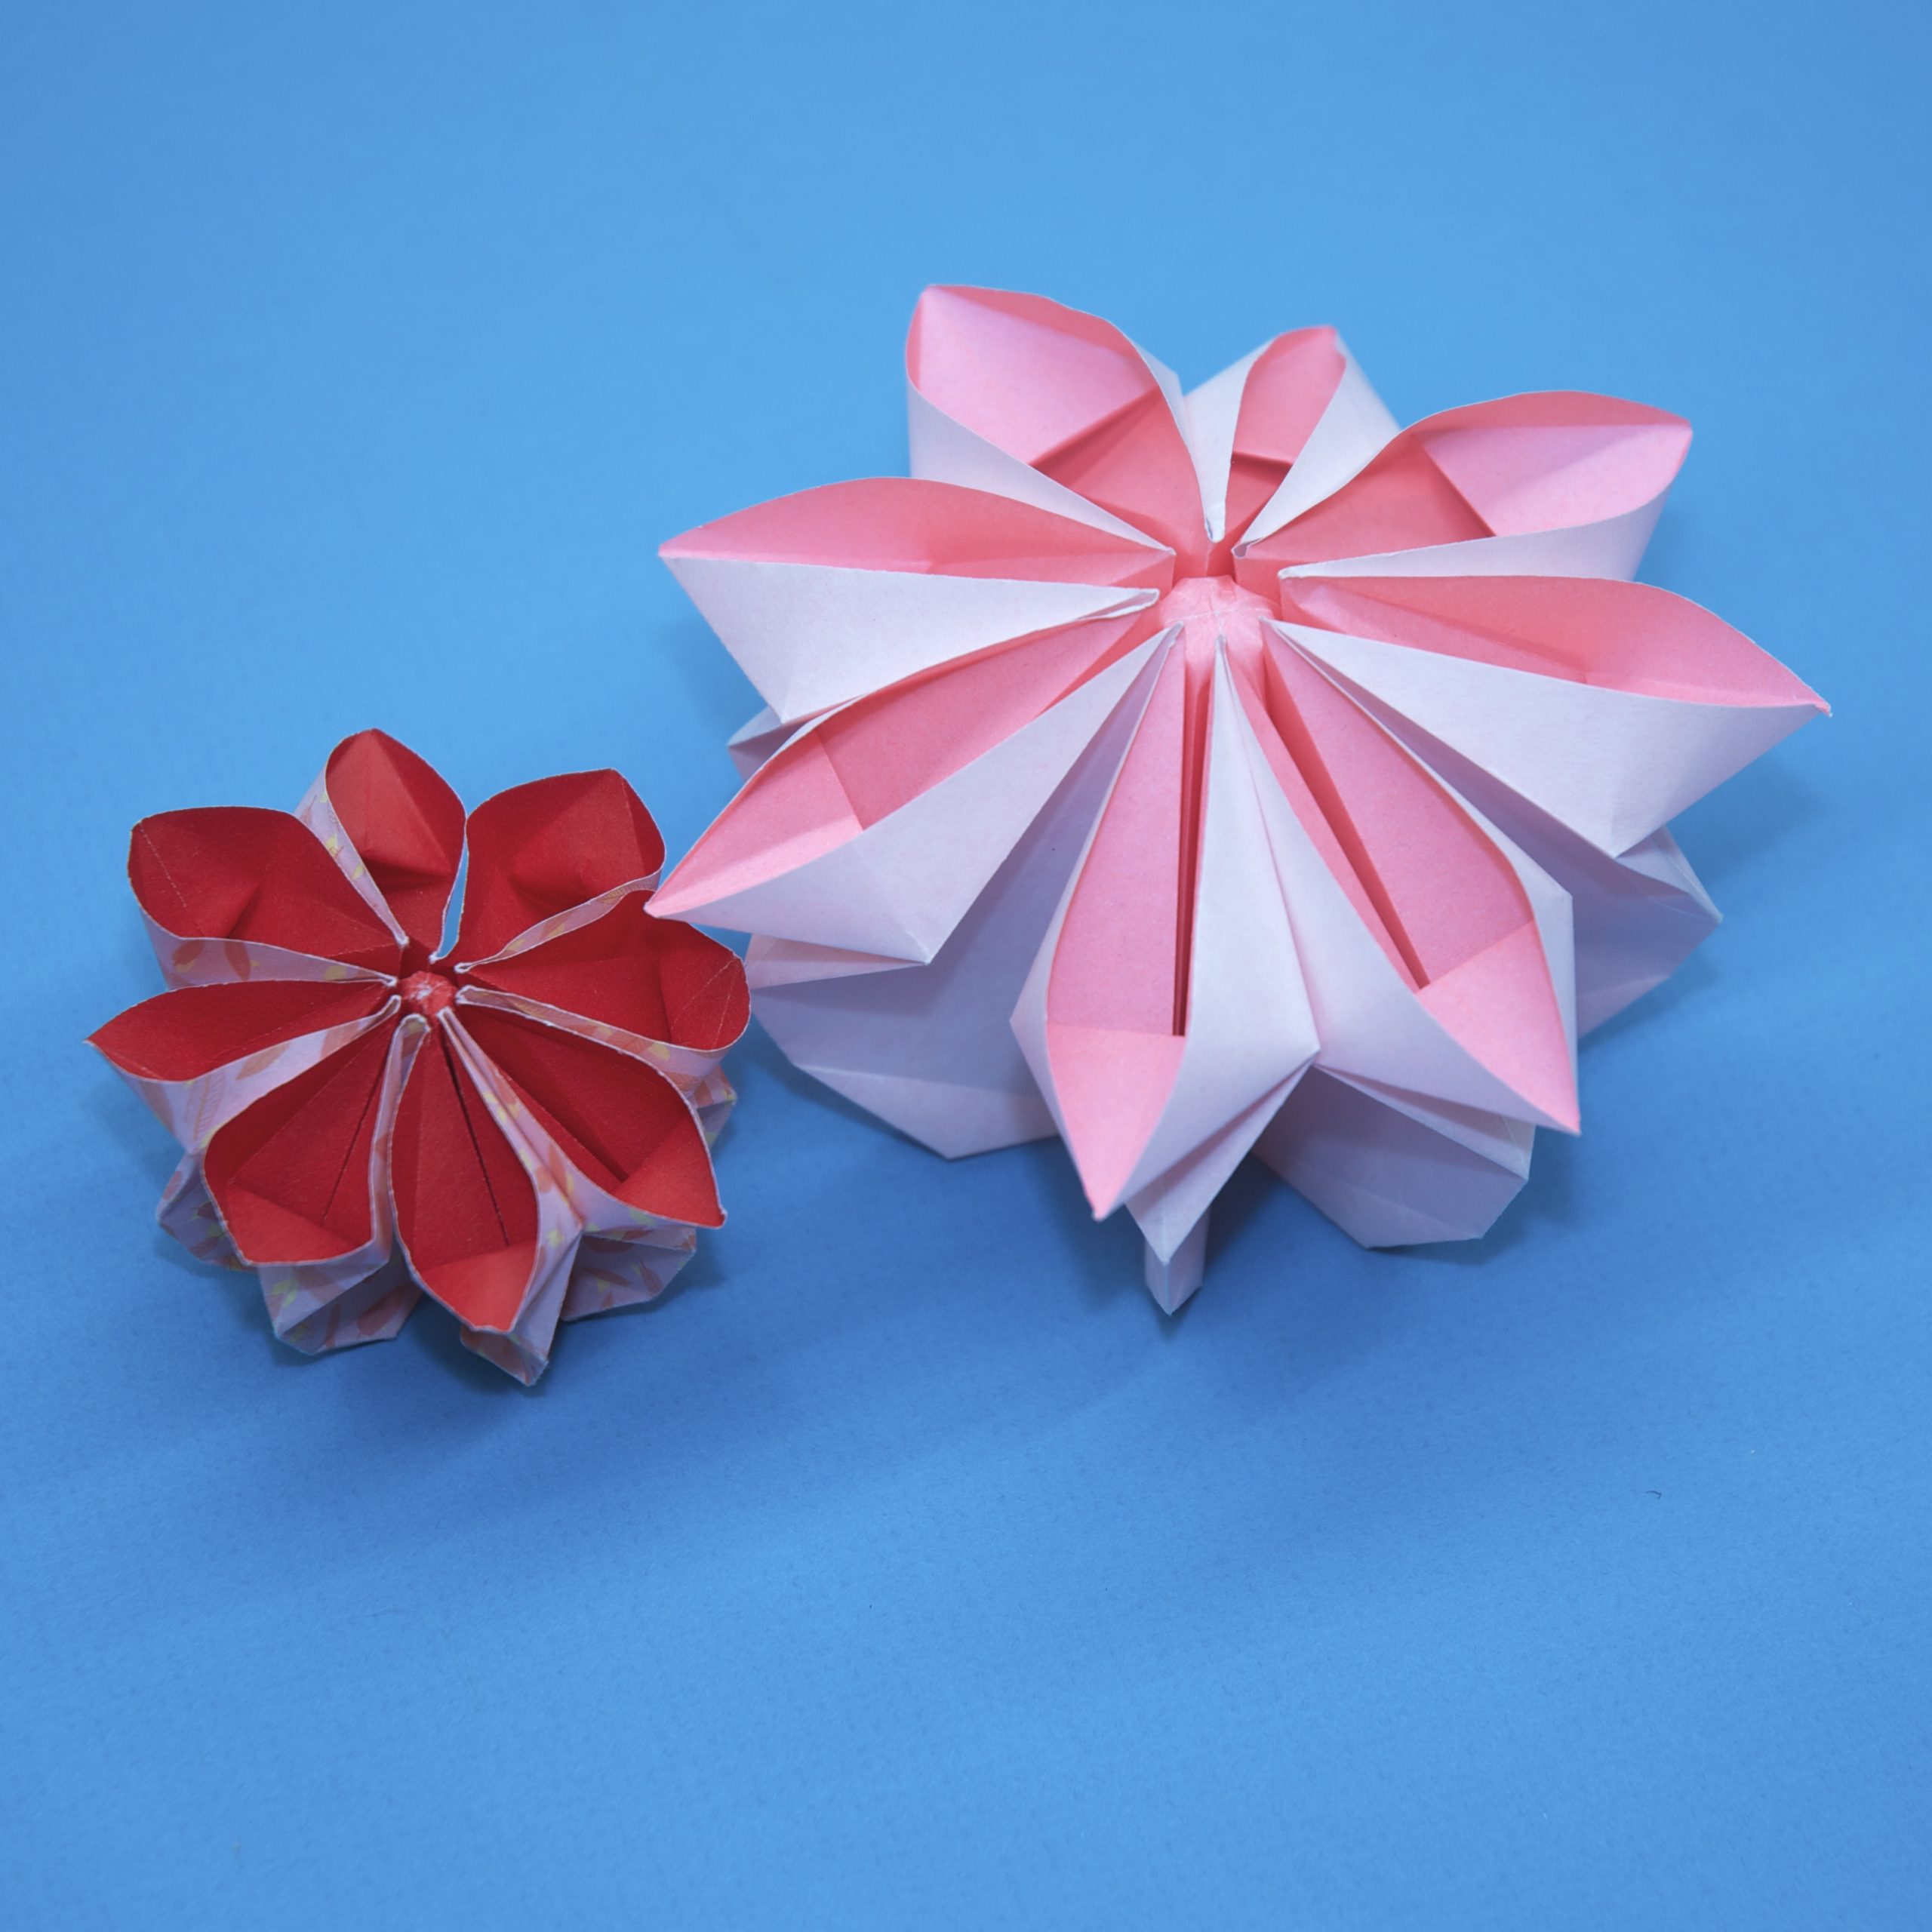 Lafosse & Alexander's Origami Flowers Kit: Lifelike Paper Flowers to  Brighten Up Your Life: Kit with Origami Book, 180 Origami Papers, 20  Projects & D (Other)